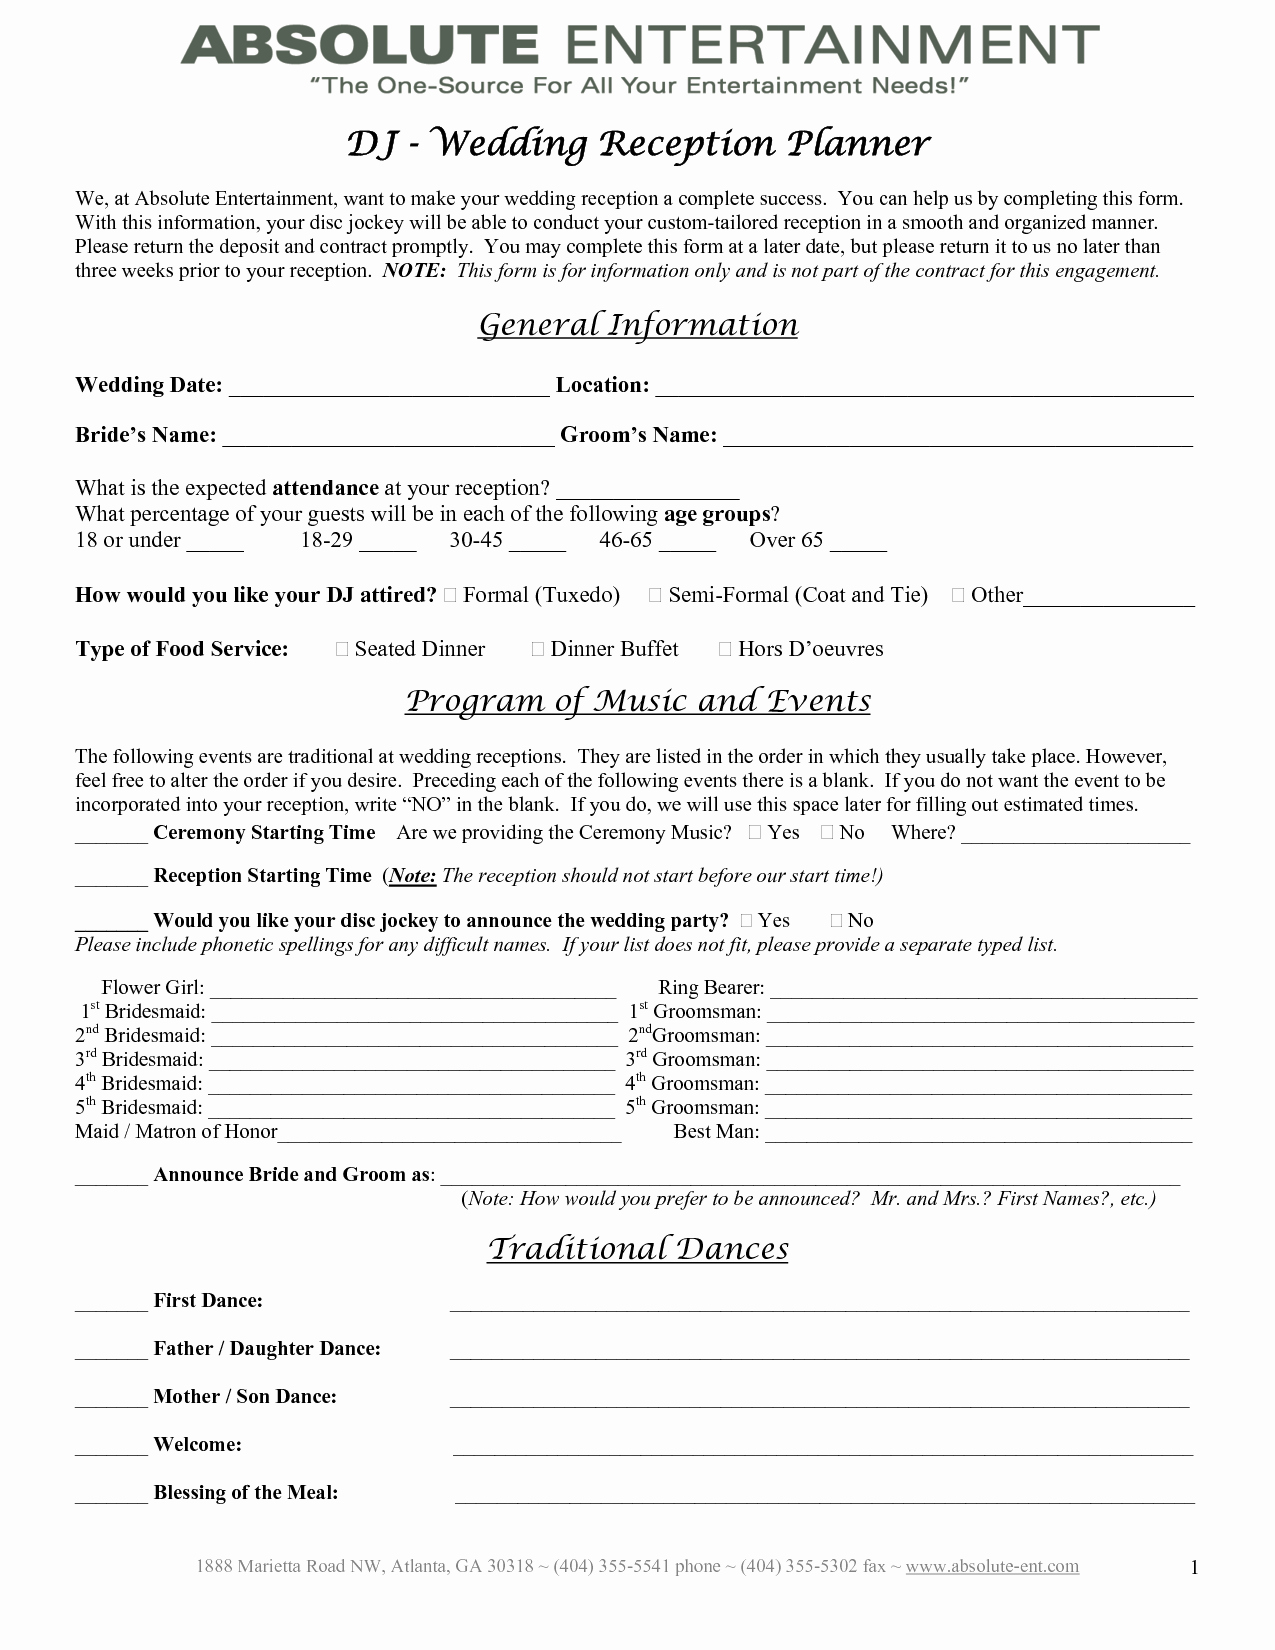 Wedding Planners Contract Template Inspirational Wedding Planner Contract Template